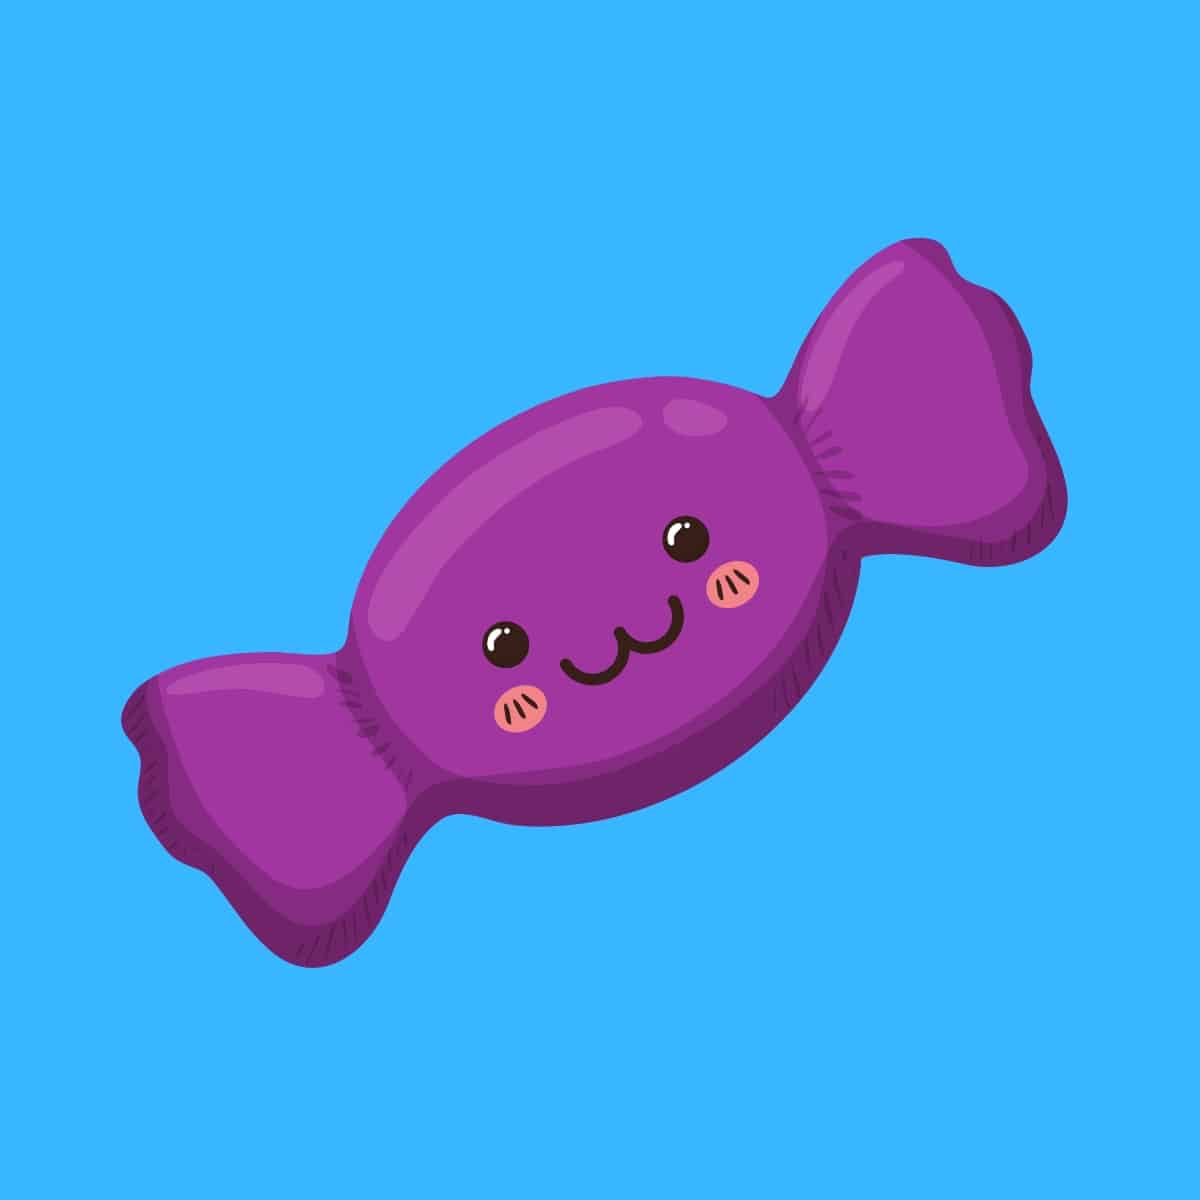 Cartoon graphic of a purple smiling candy on blue background.